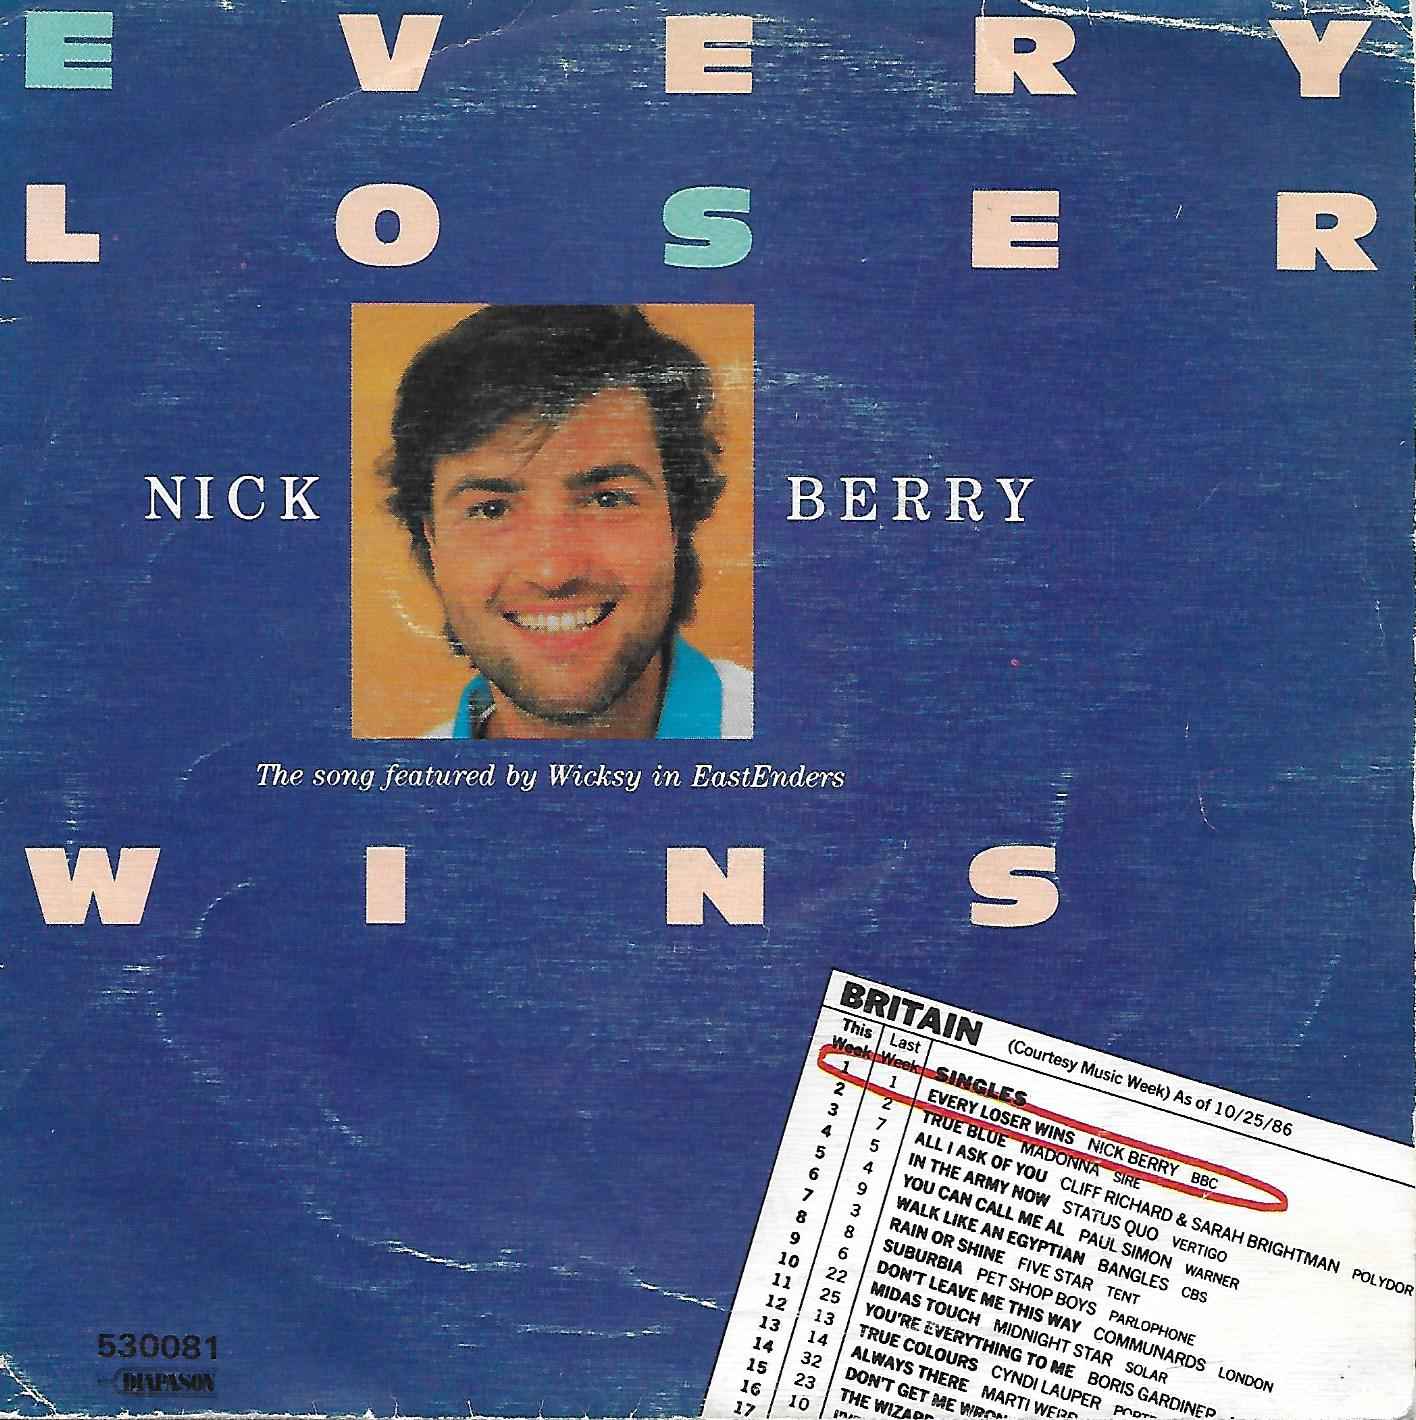 Picture of 53.0081 Every loser wins (Spanish import) by artist Nick Berry from the BBC records and Tapes library